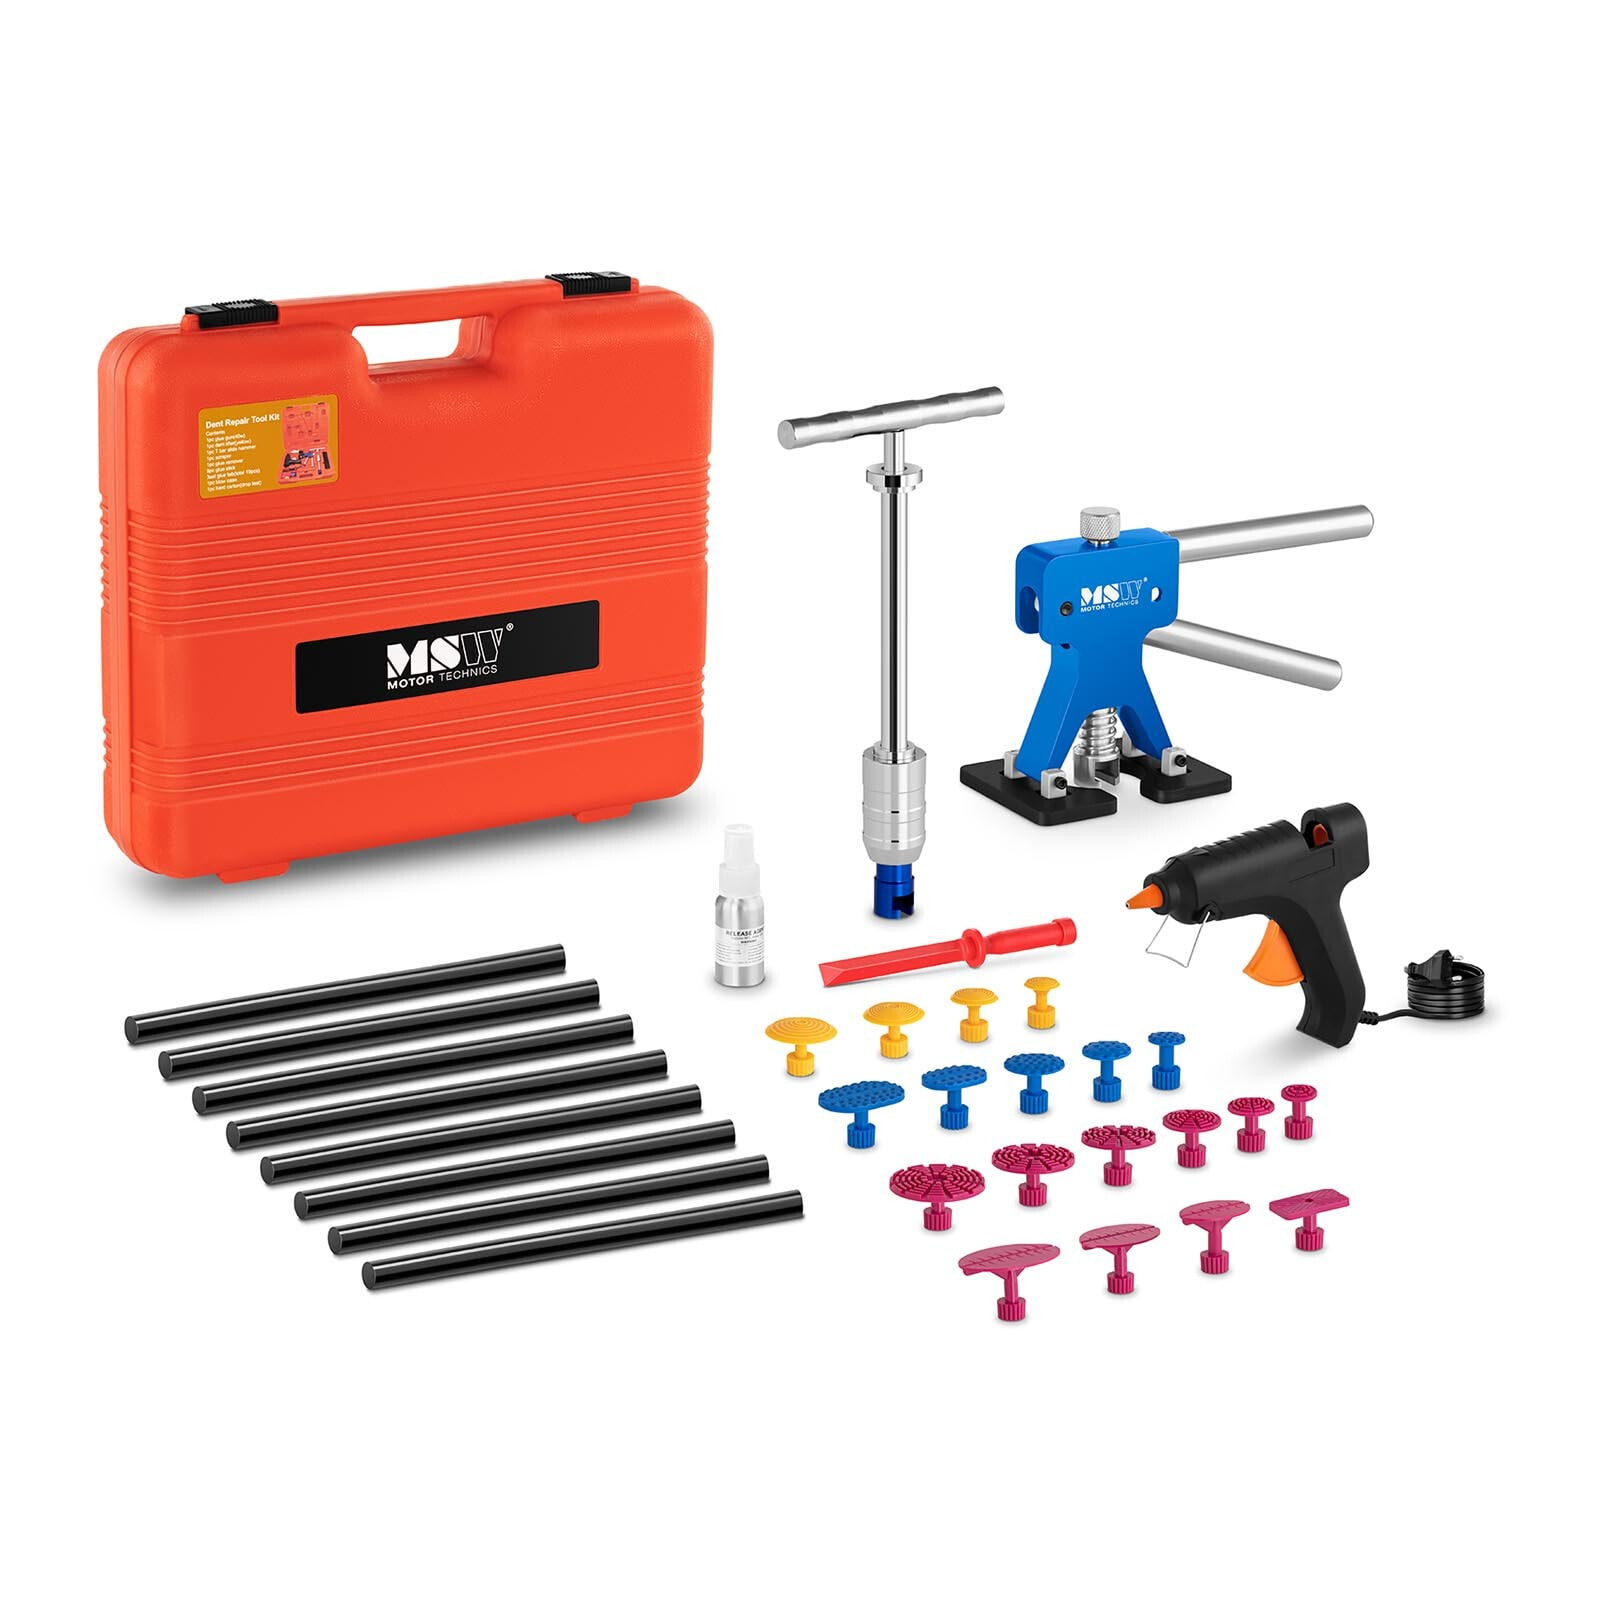 PROFI repair kit PDR for removing dents in the car body - 33 elements